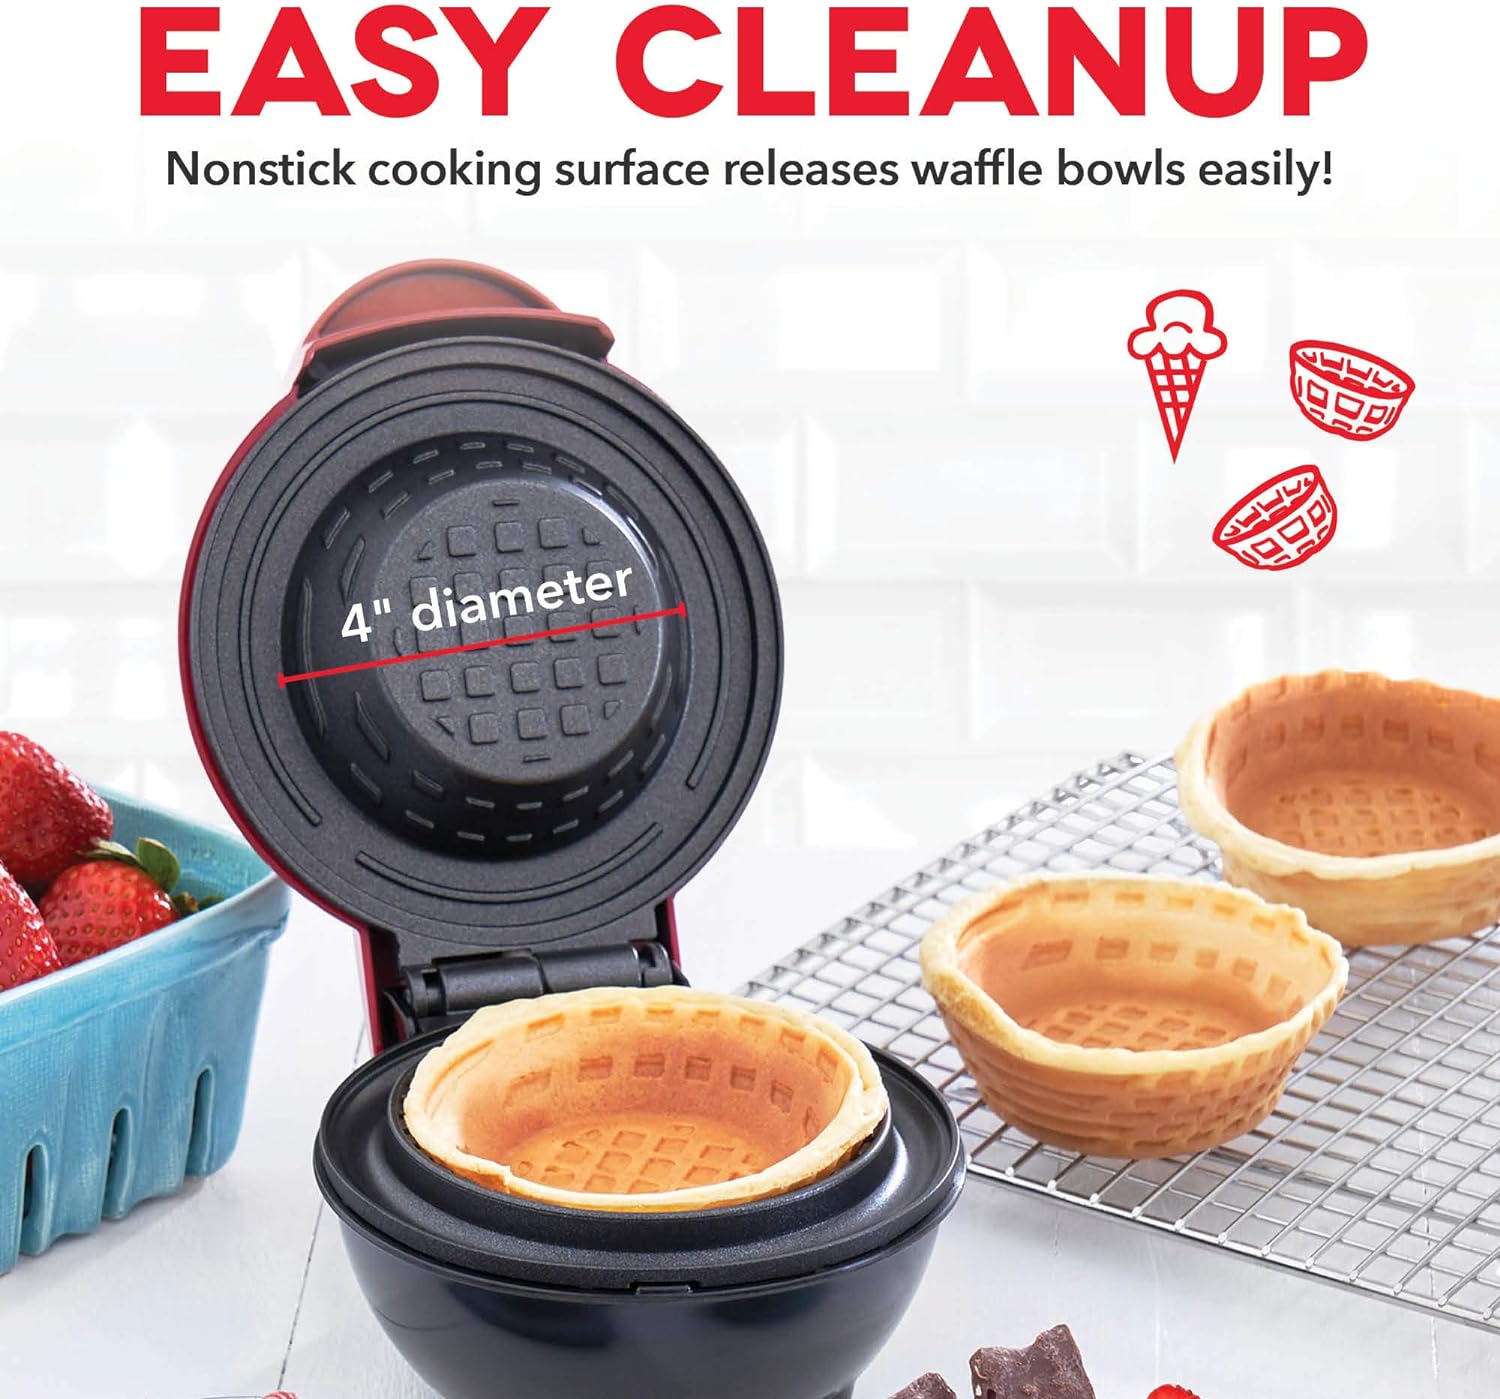 Dash Mini Waffle Bowl Maker for Breakfast, Burrito Bowls, Ice Cream and Other Sweet Desserts, Recipe Guide Included - Red